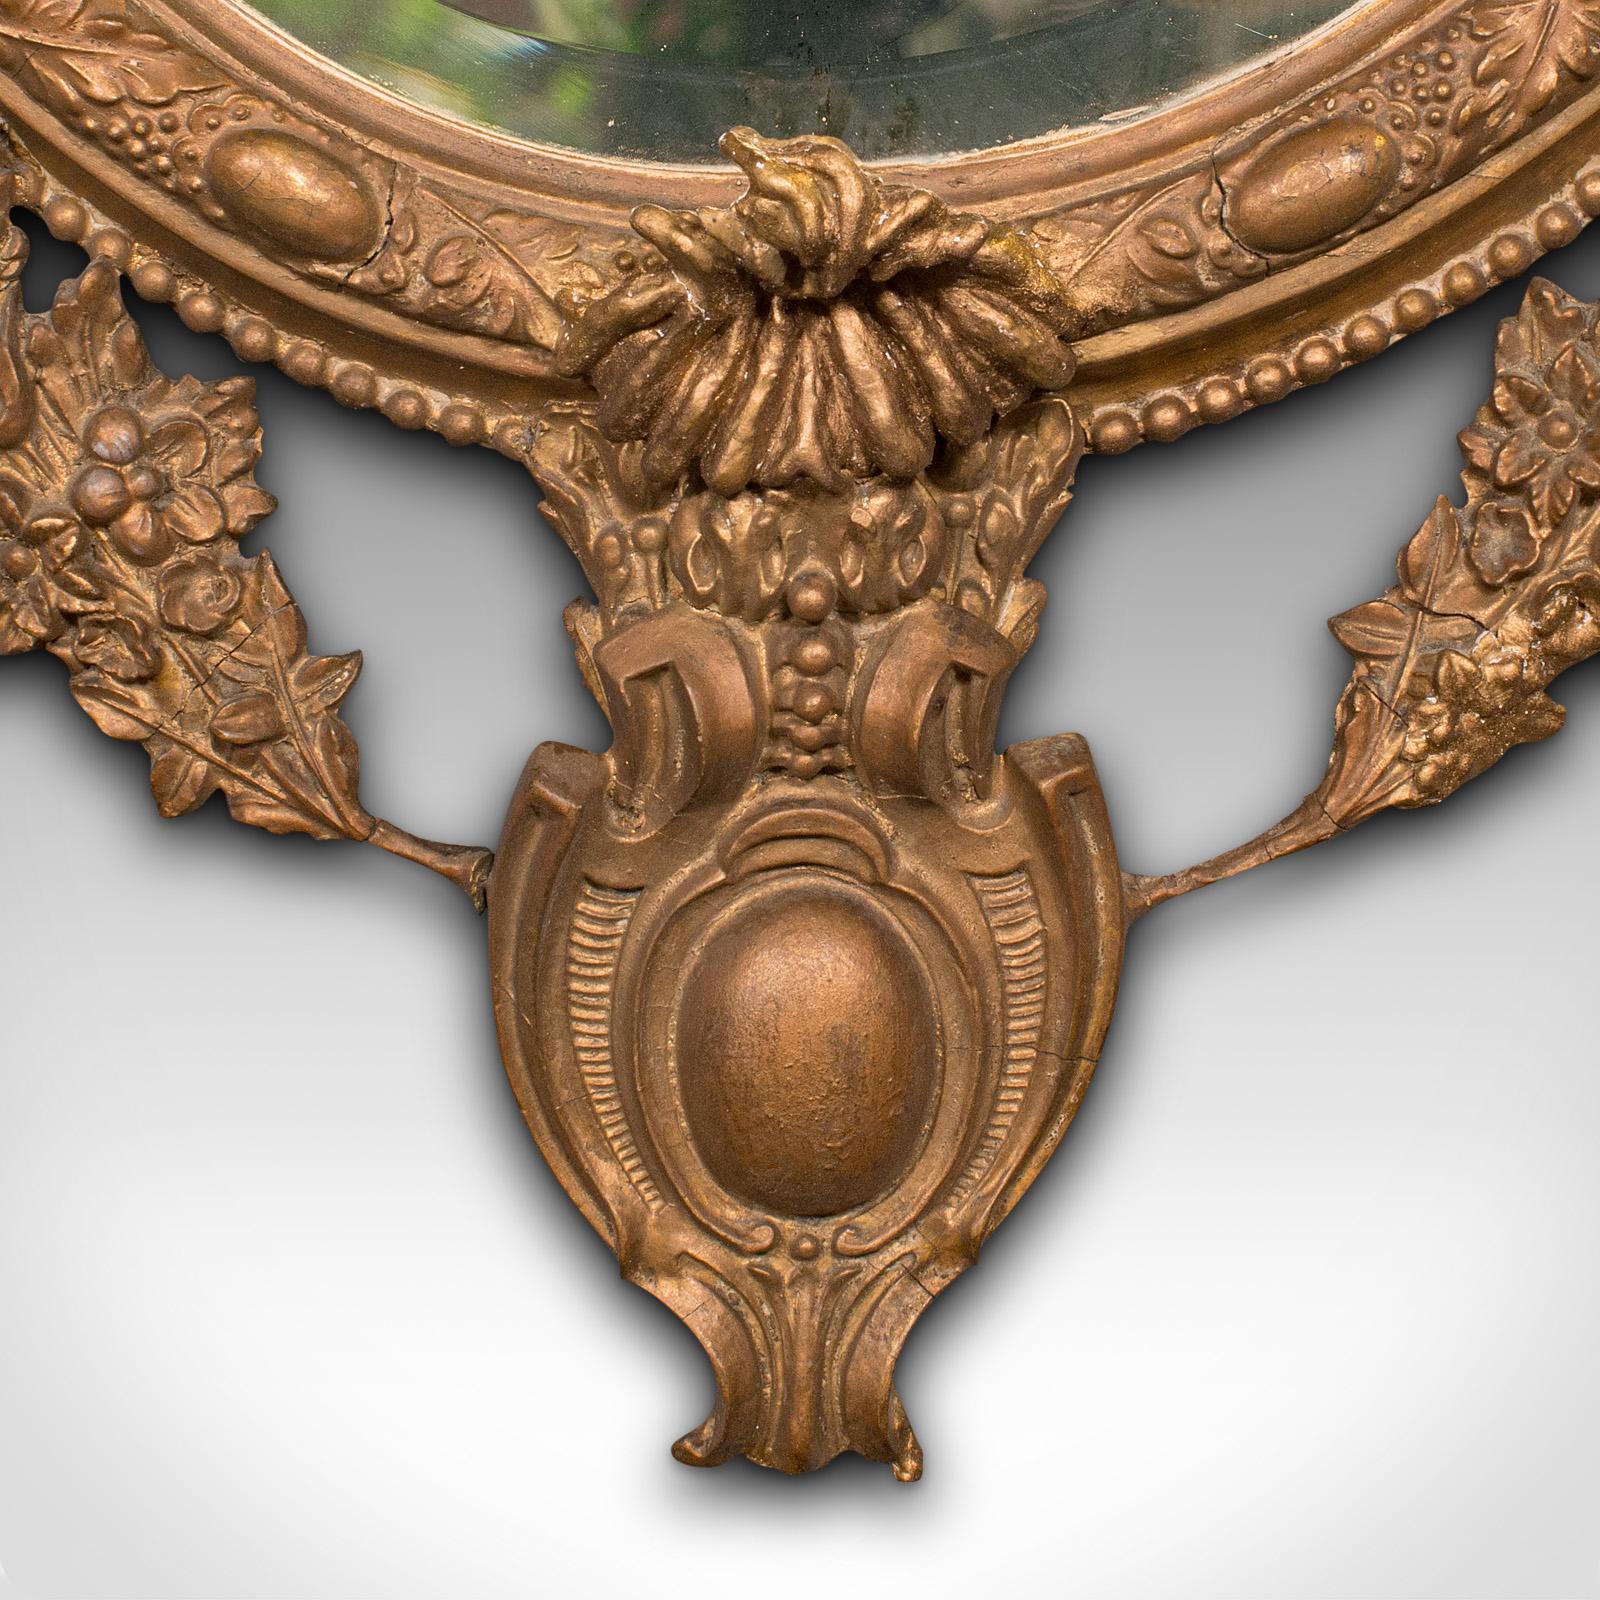 Antique Ornate Wall Mirror, French, Gilt Gesso, Bevelled Glass, Victorian, 1900 For Sale 3